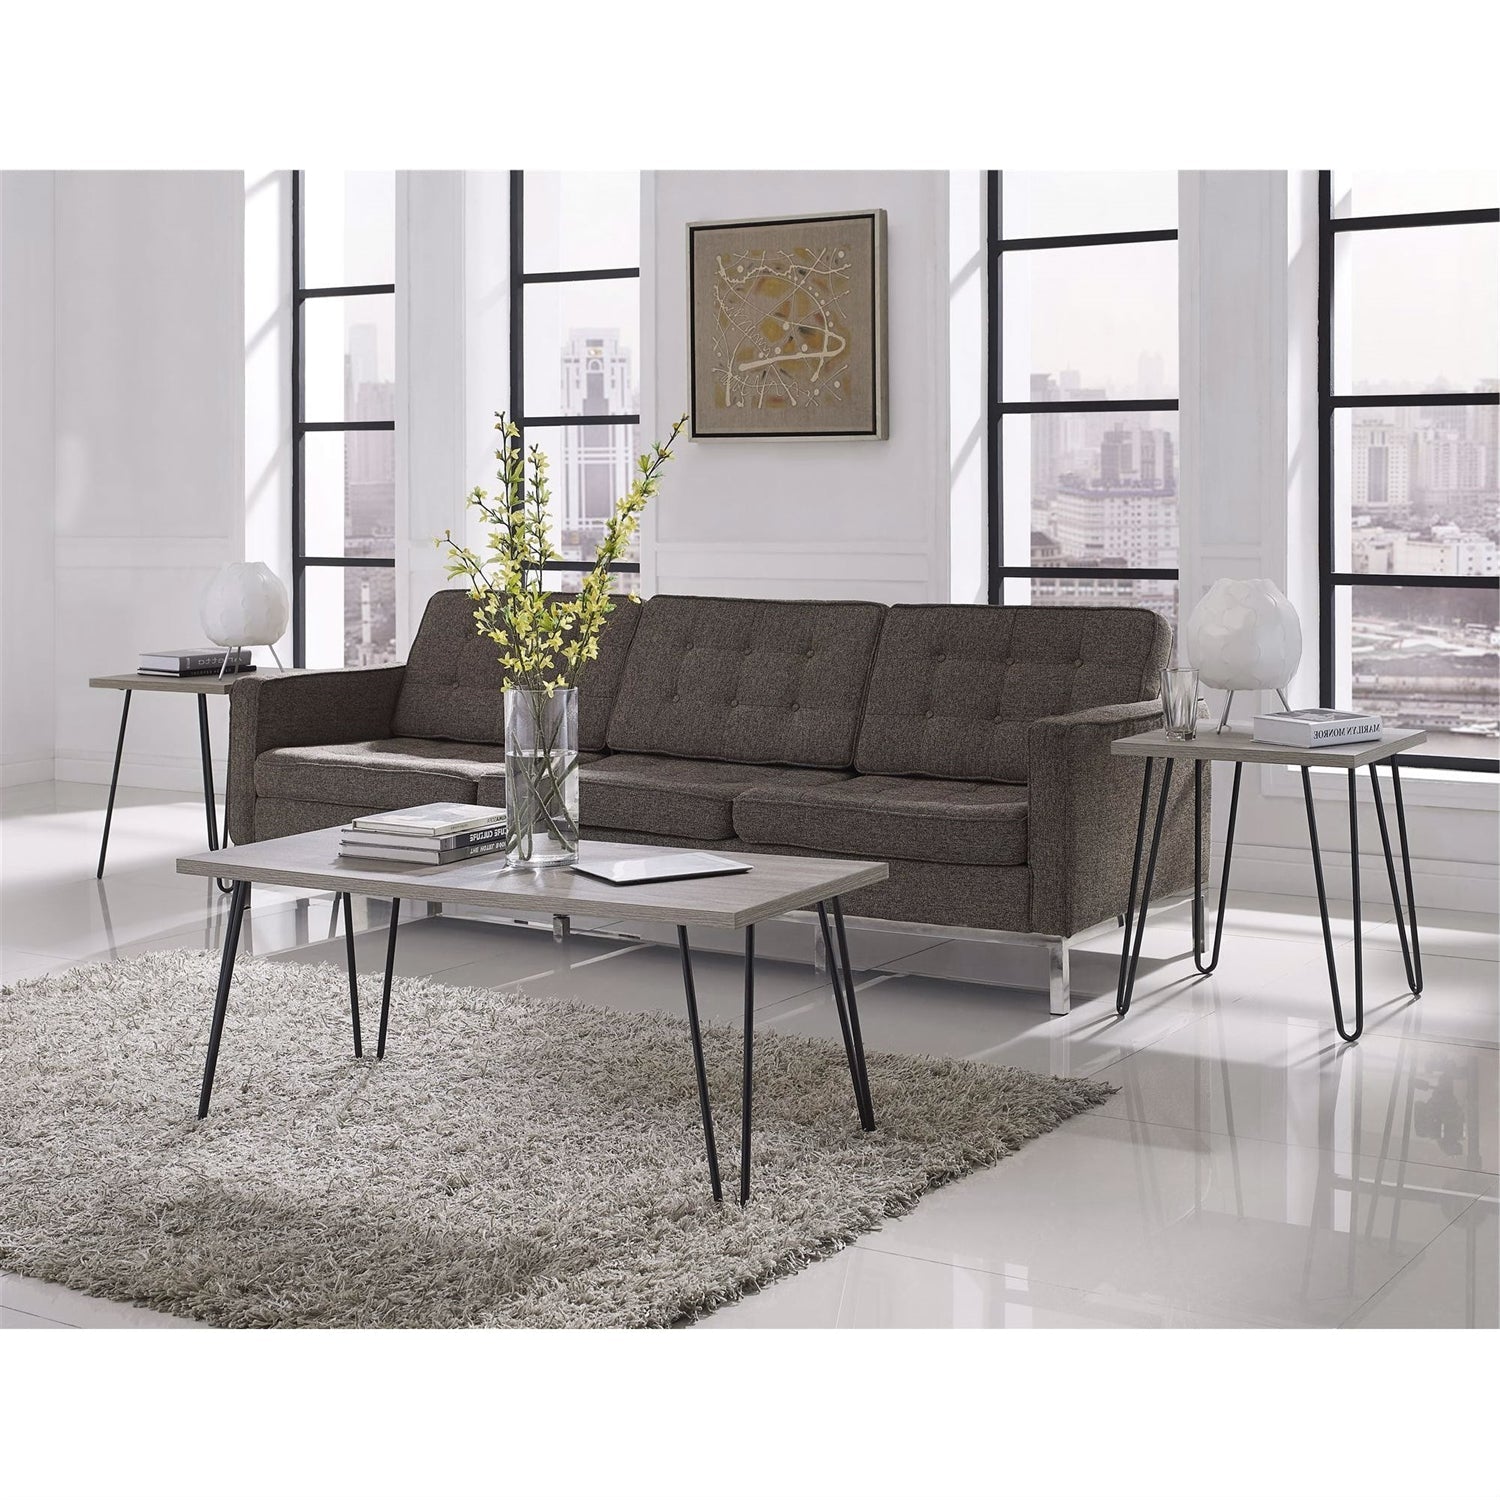 Living Room > Coffee Tables - Modern Classic Vintage Style Coffee Table With Wood Top And Metal Legs